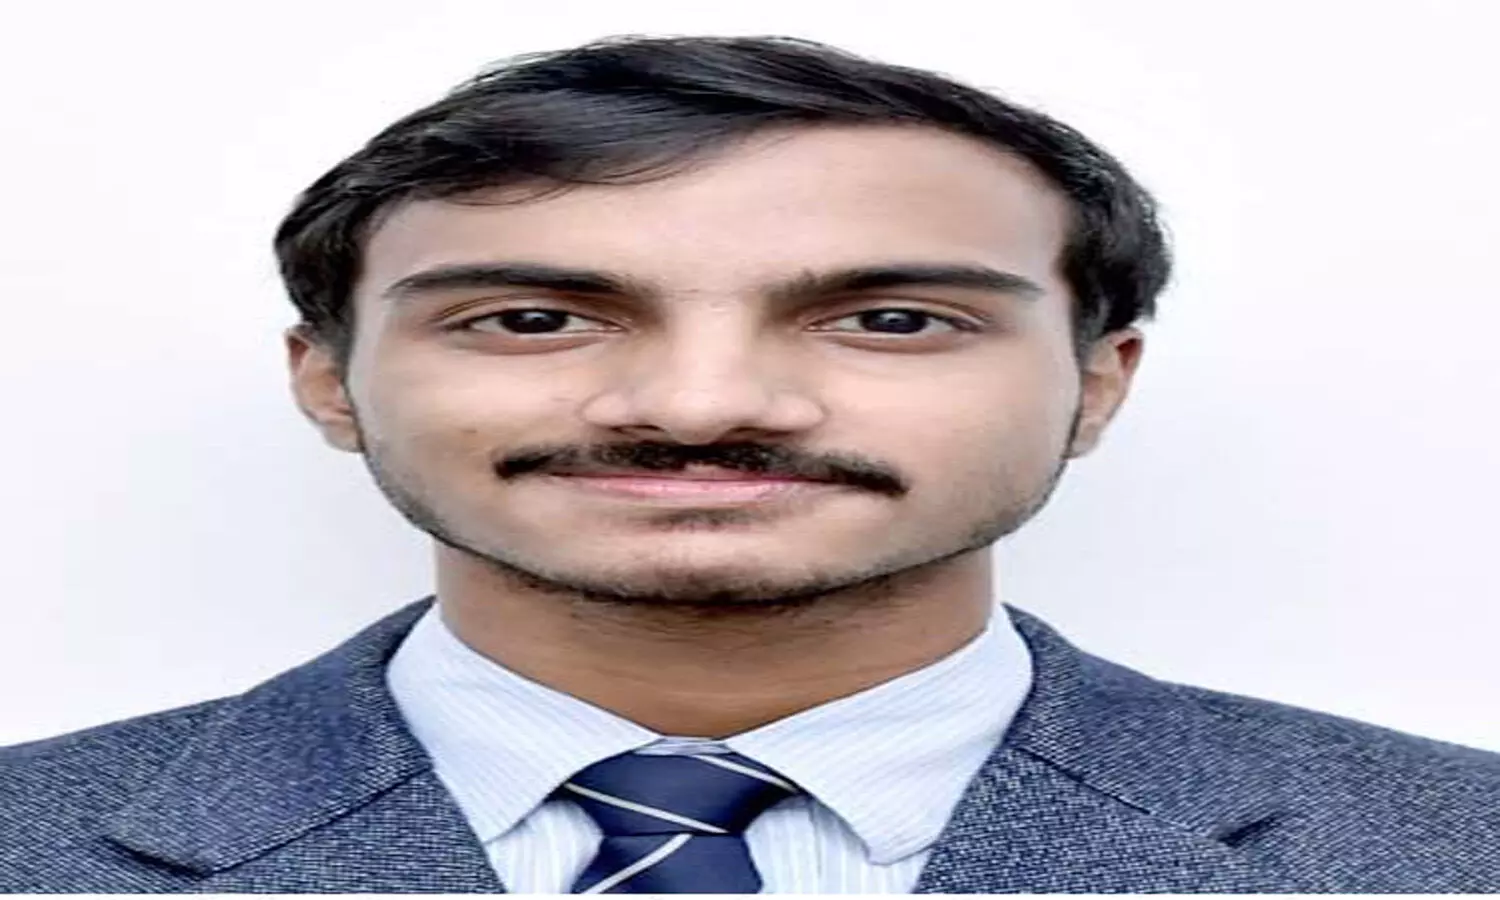 CMS student conferred AP Scholar with Honour award by College board, USA; scores perfect 5 in 4 subjects